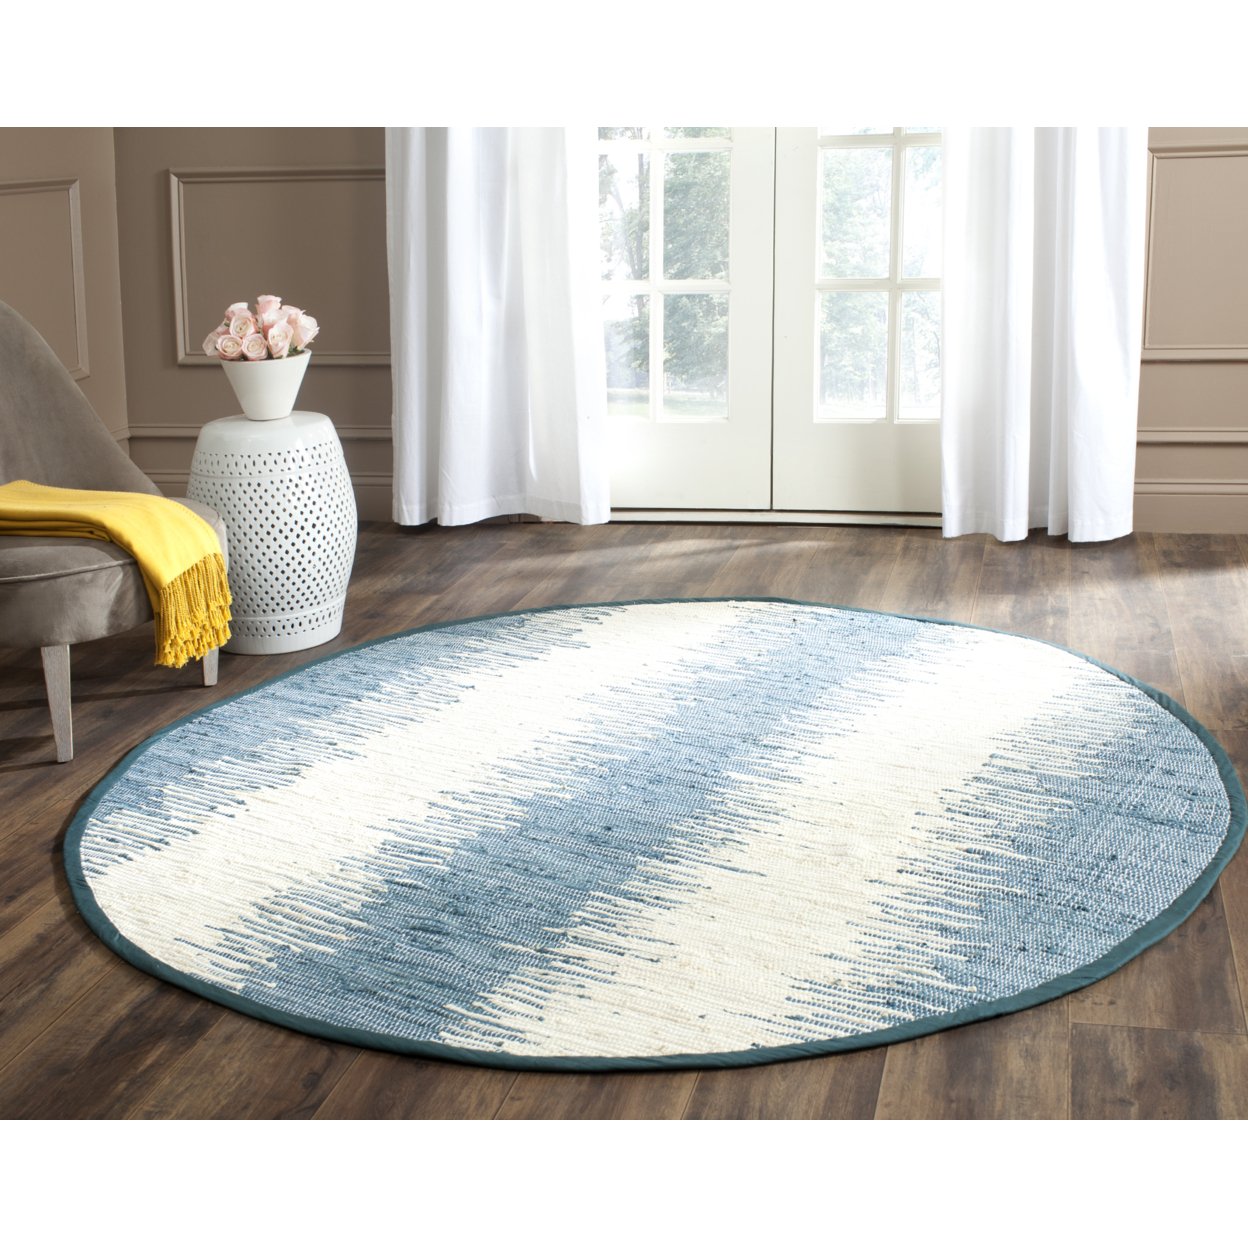 SAFAVIEH Montauk Collection MTK751A Handwoven Blue Rug - 6' Square